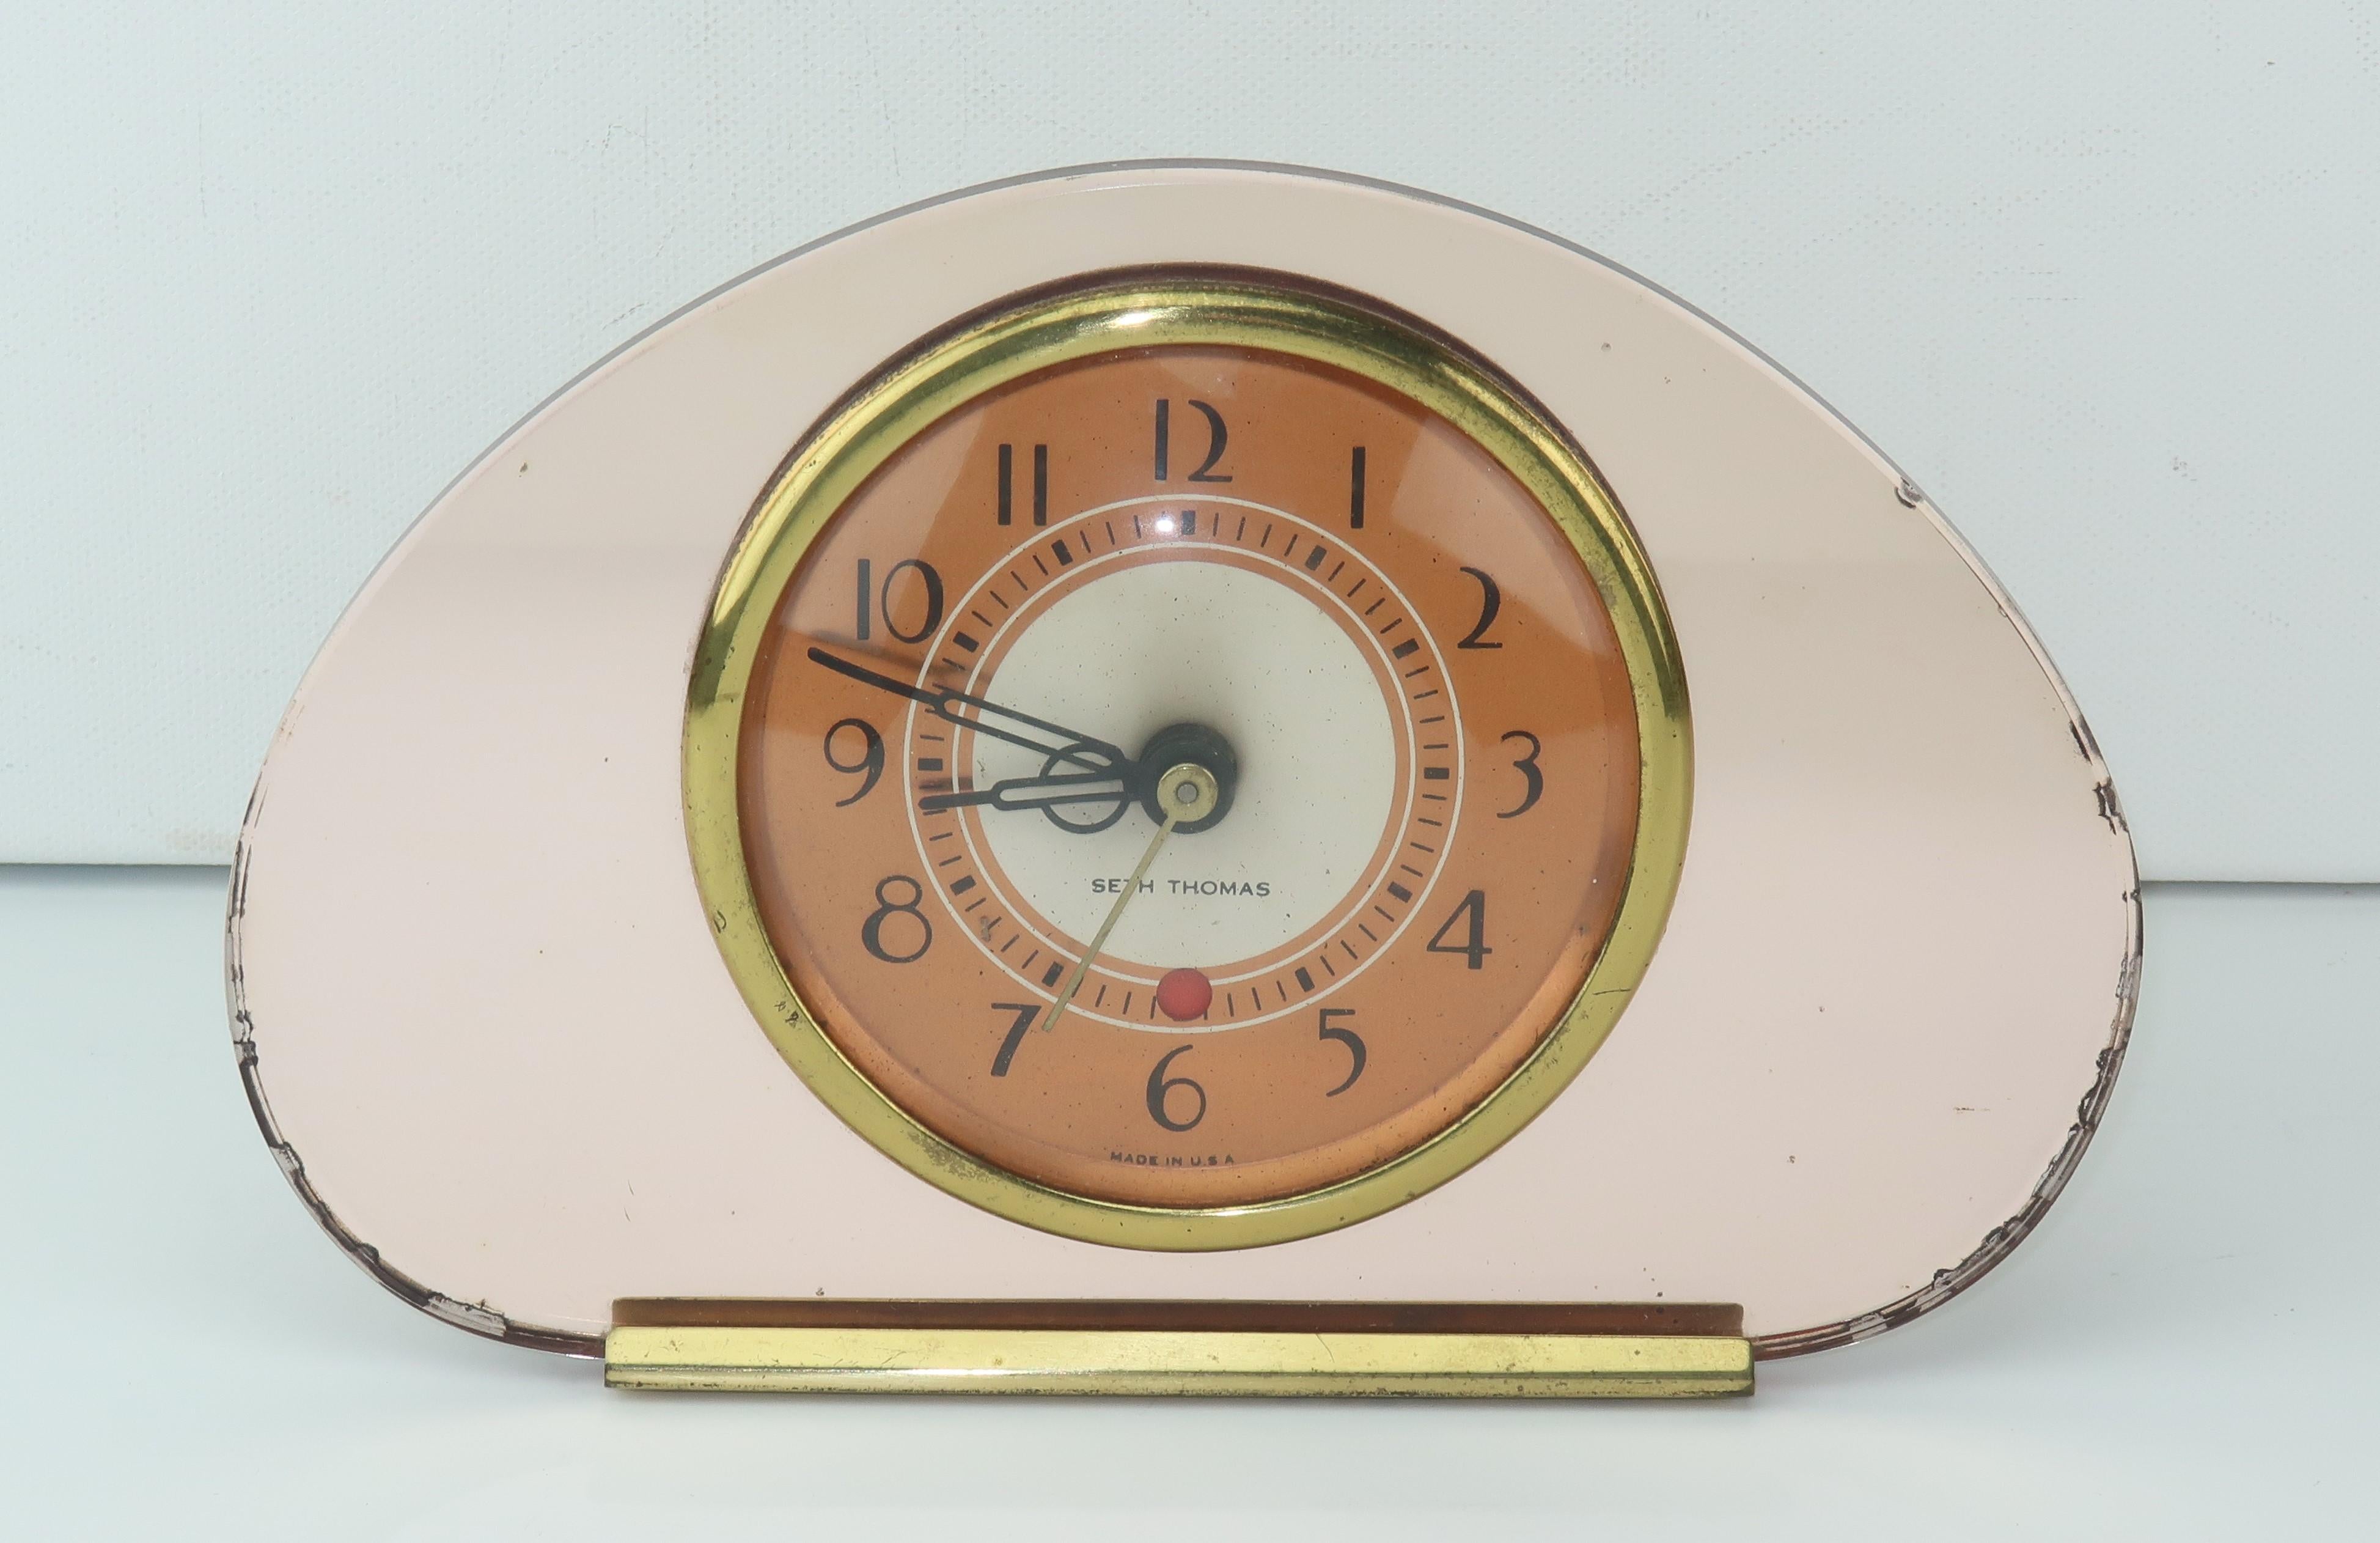 The epitome of Hollywood glam!  This Art Deco era Seth Thomas electric clock is mirrored for ultimate effect.  The peachy pink case is complimented by a copper dial accented with stylized black numbers and hands ... including second hand.  Designed